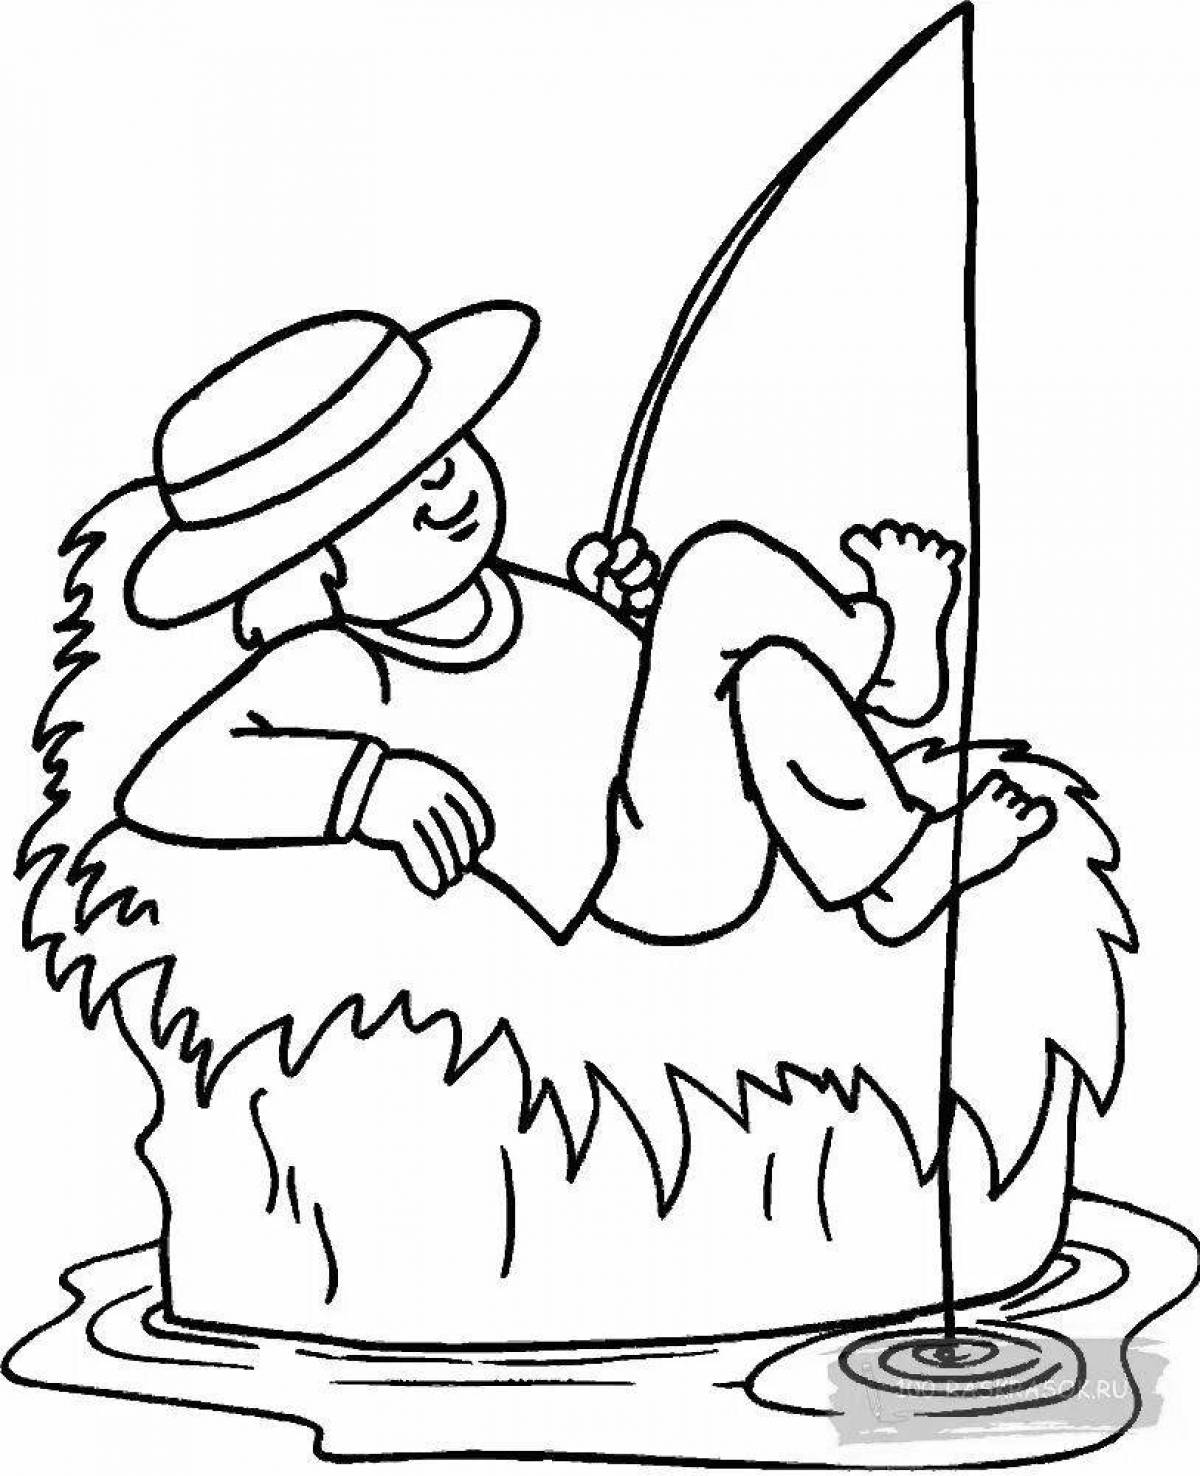 Invitation to go fishing coloring for kids